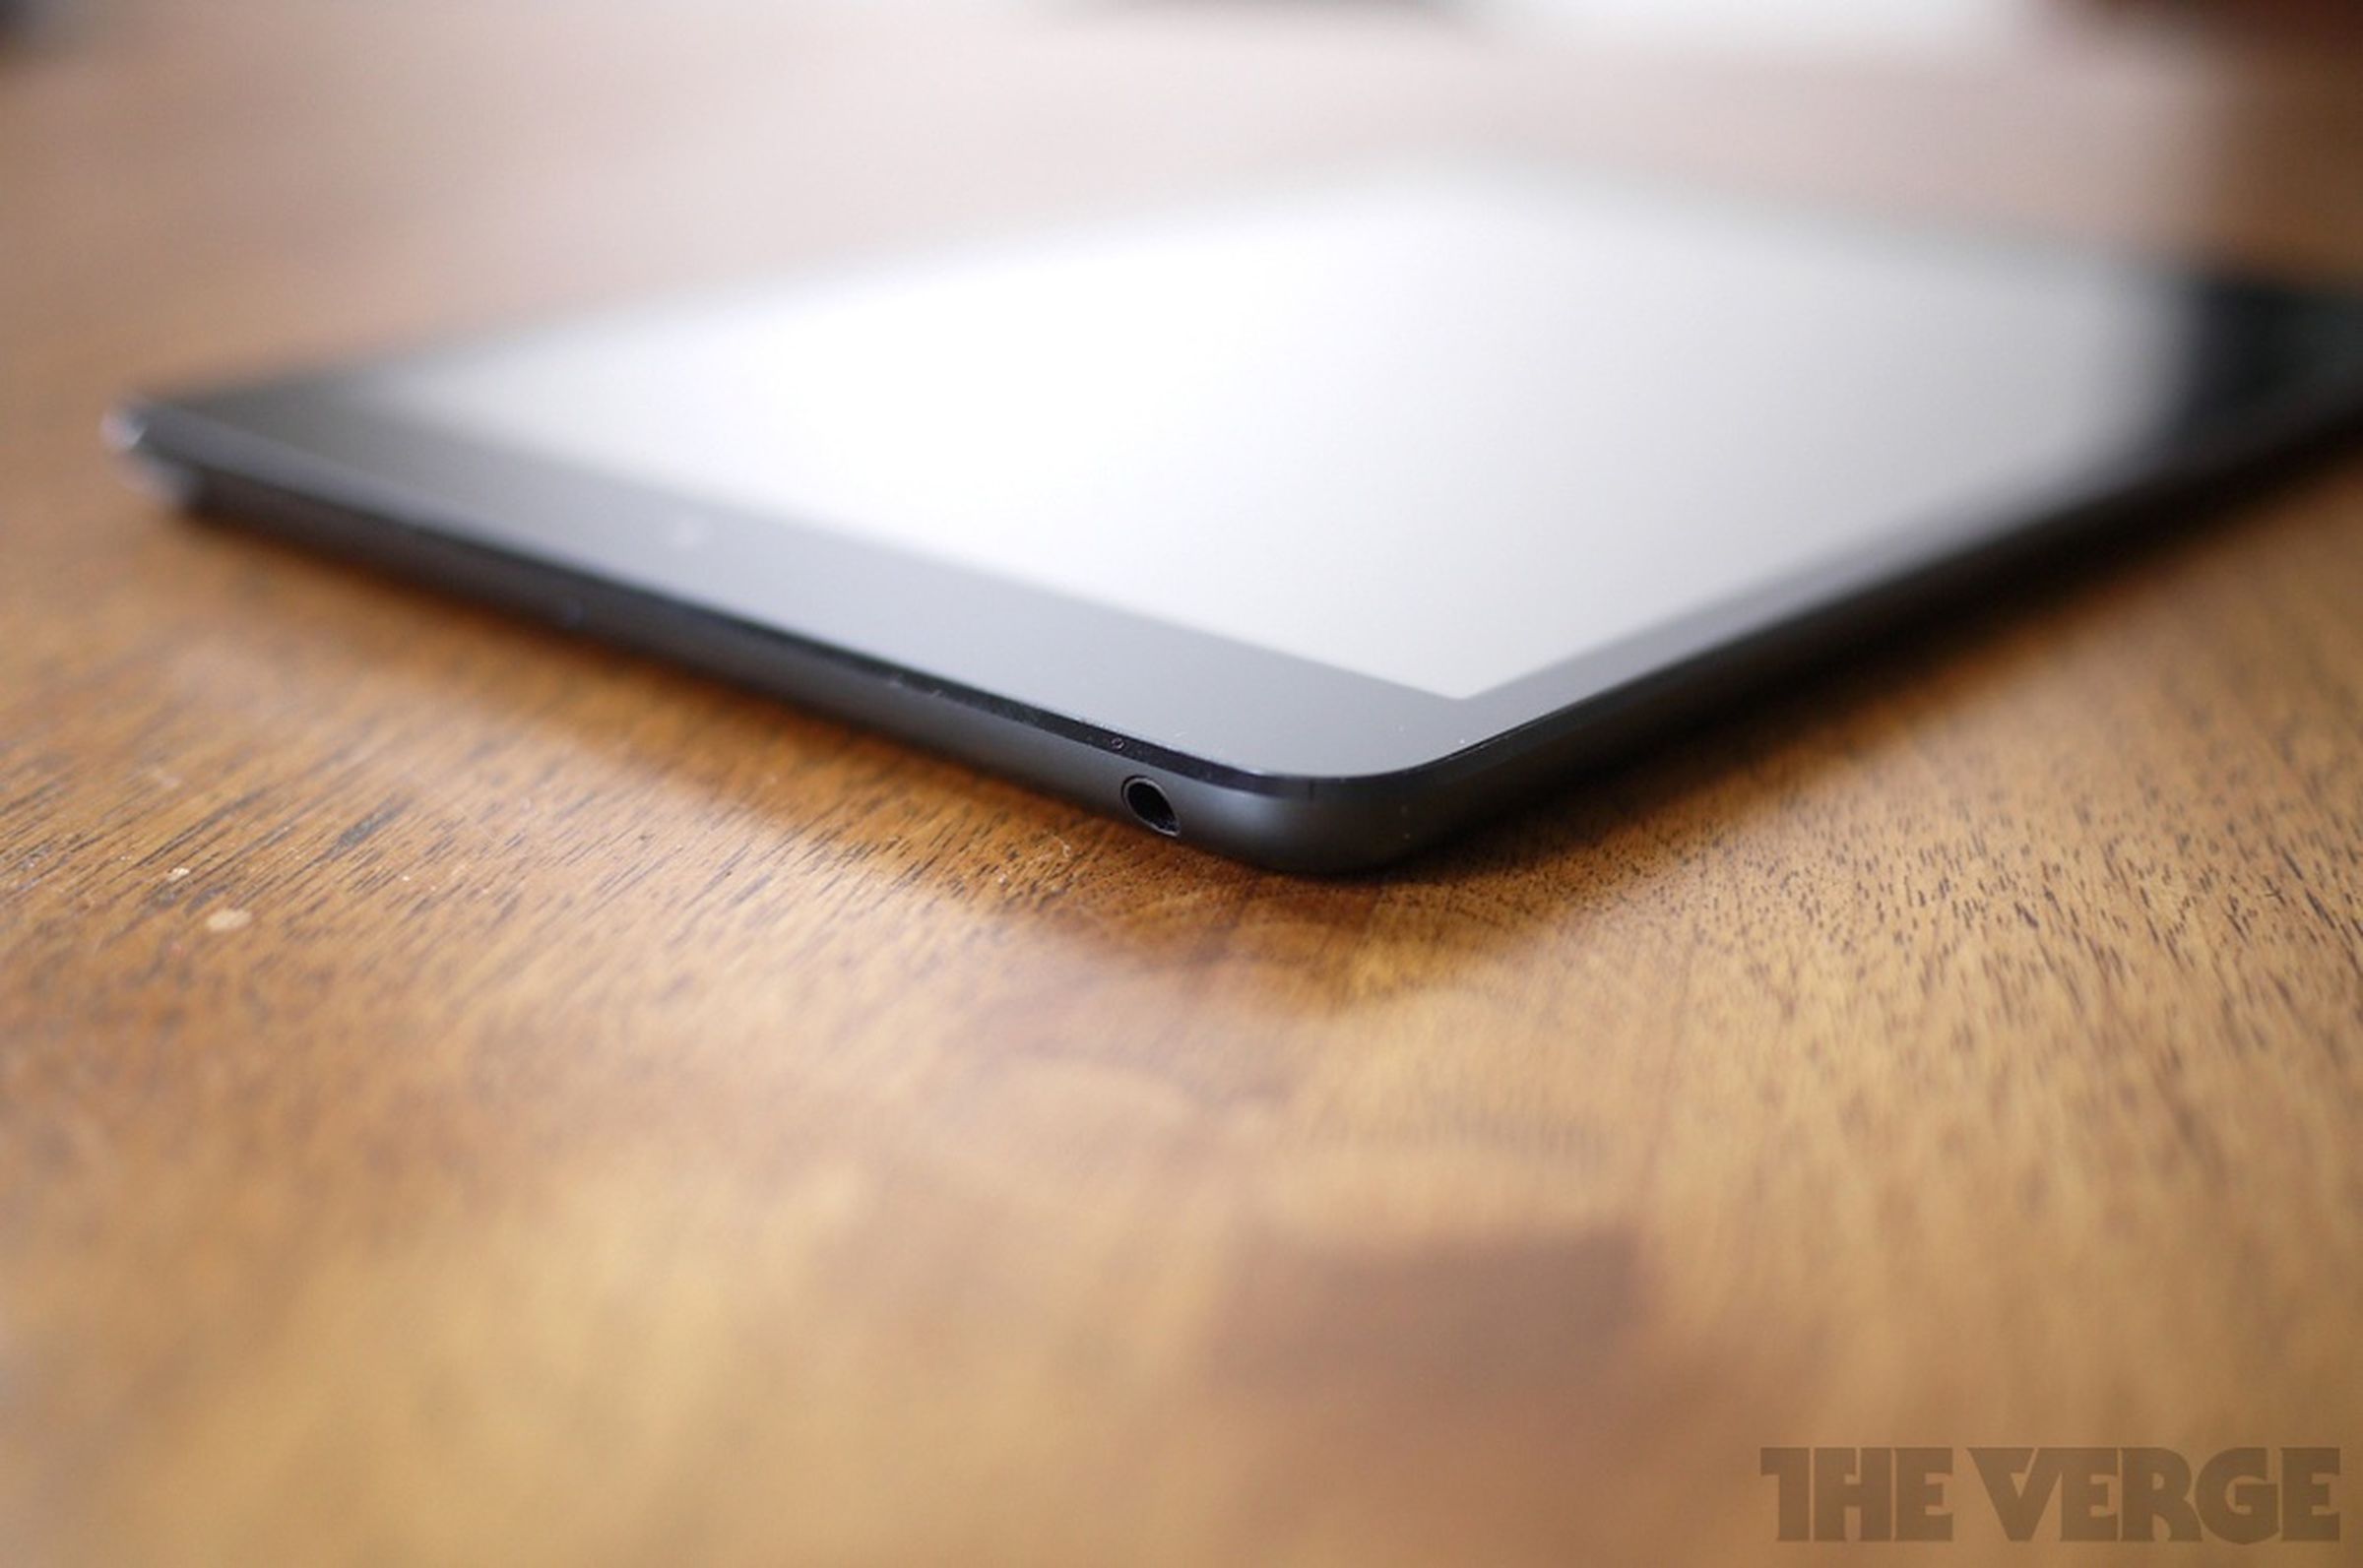 Hands-on with the iPad mini